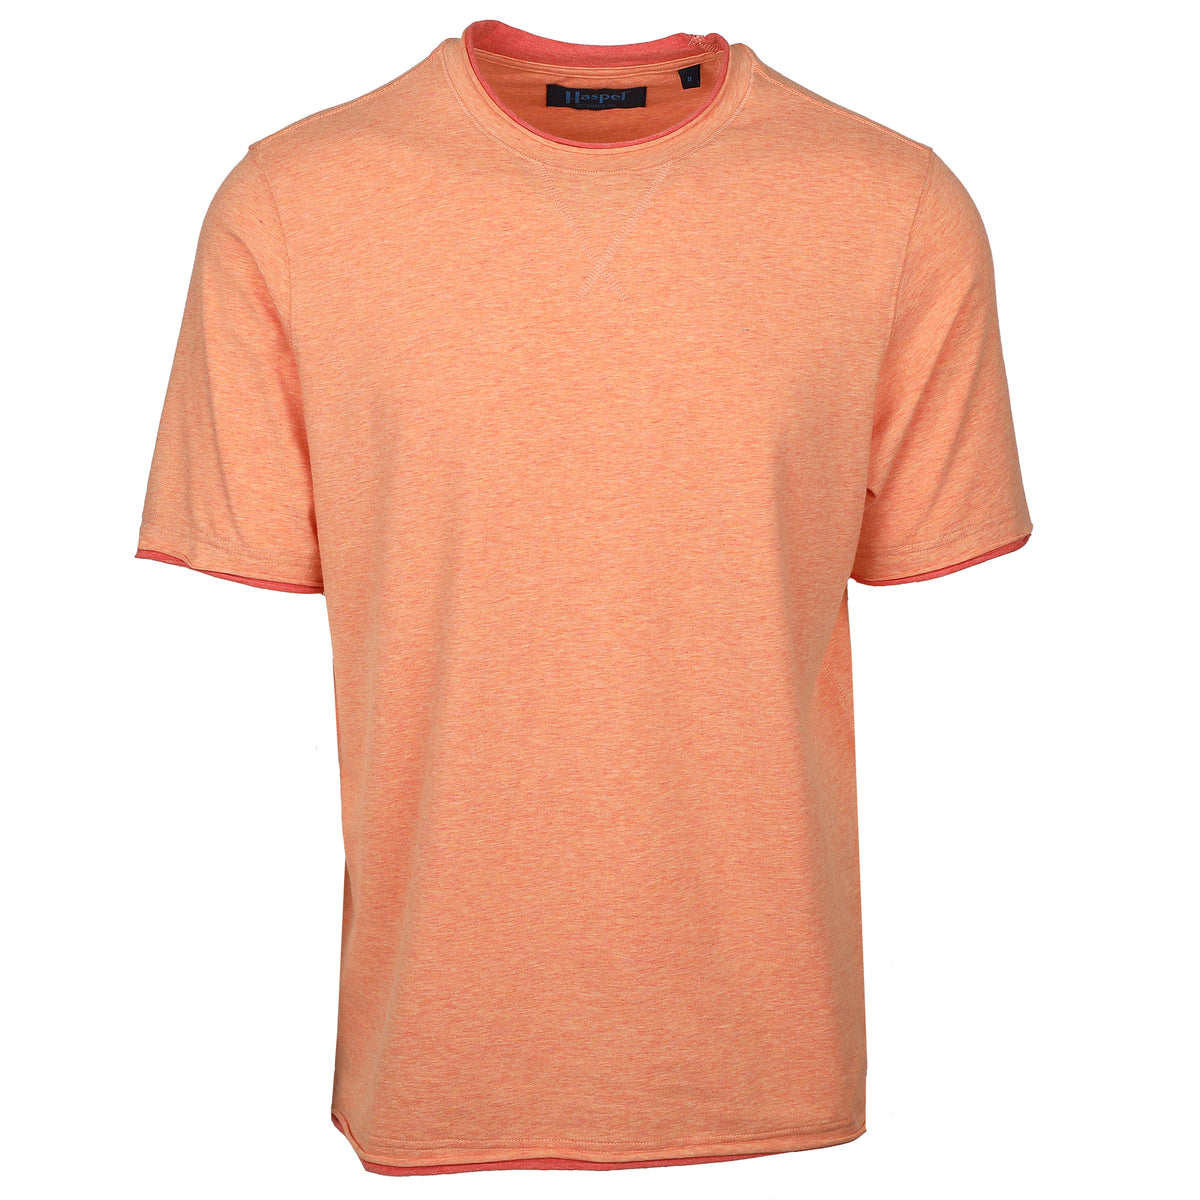 Step out into the warm weather in confidence with the Pompeii Melange Contrast Crew T-Shirt. Crafted from 100% cotton, this peach t-shirt stands out with a sharp orange contrast. Take on the summer with a daring fashion statement and make a statement wherever you go.   100% Luxe Cotton • Relaxed Fit • Contrast Edging • Machine Washable • Imported